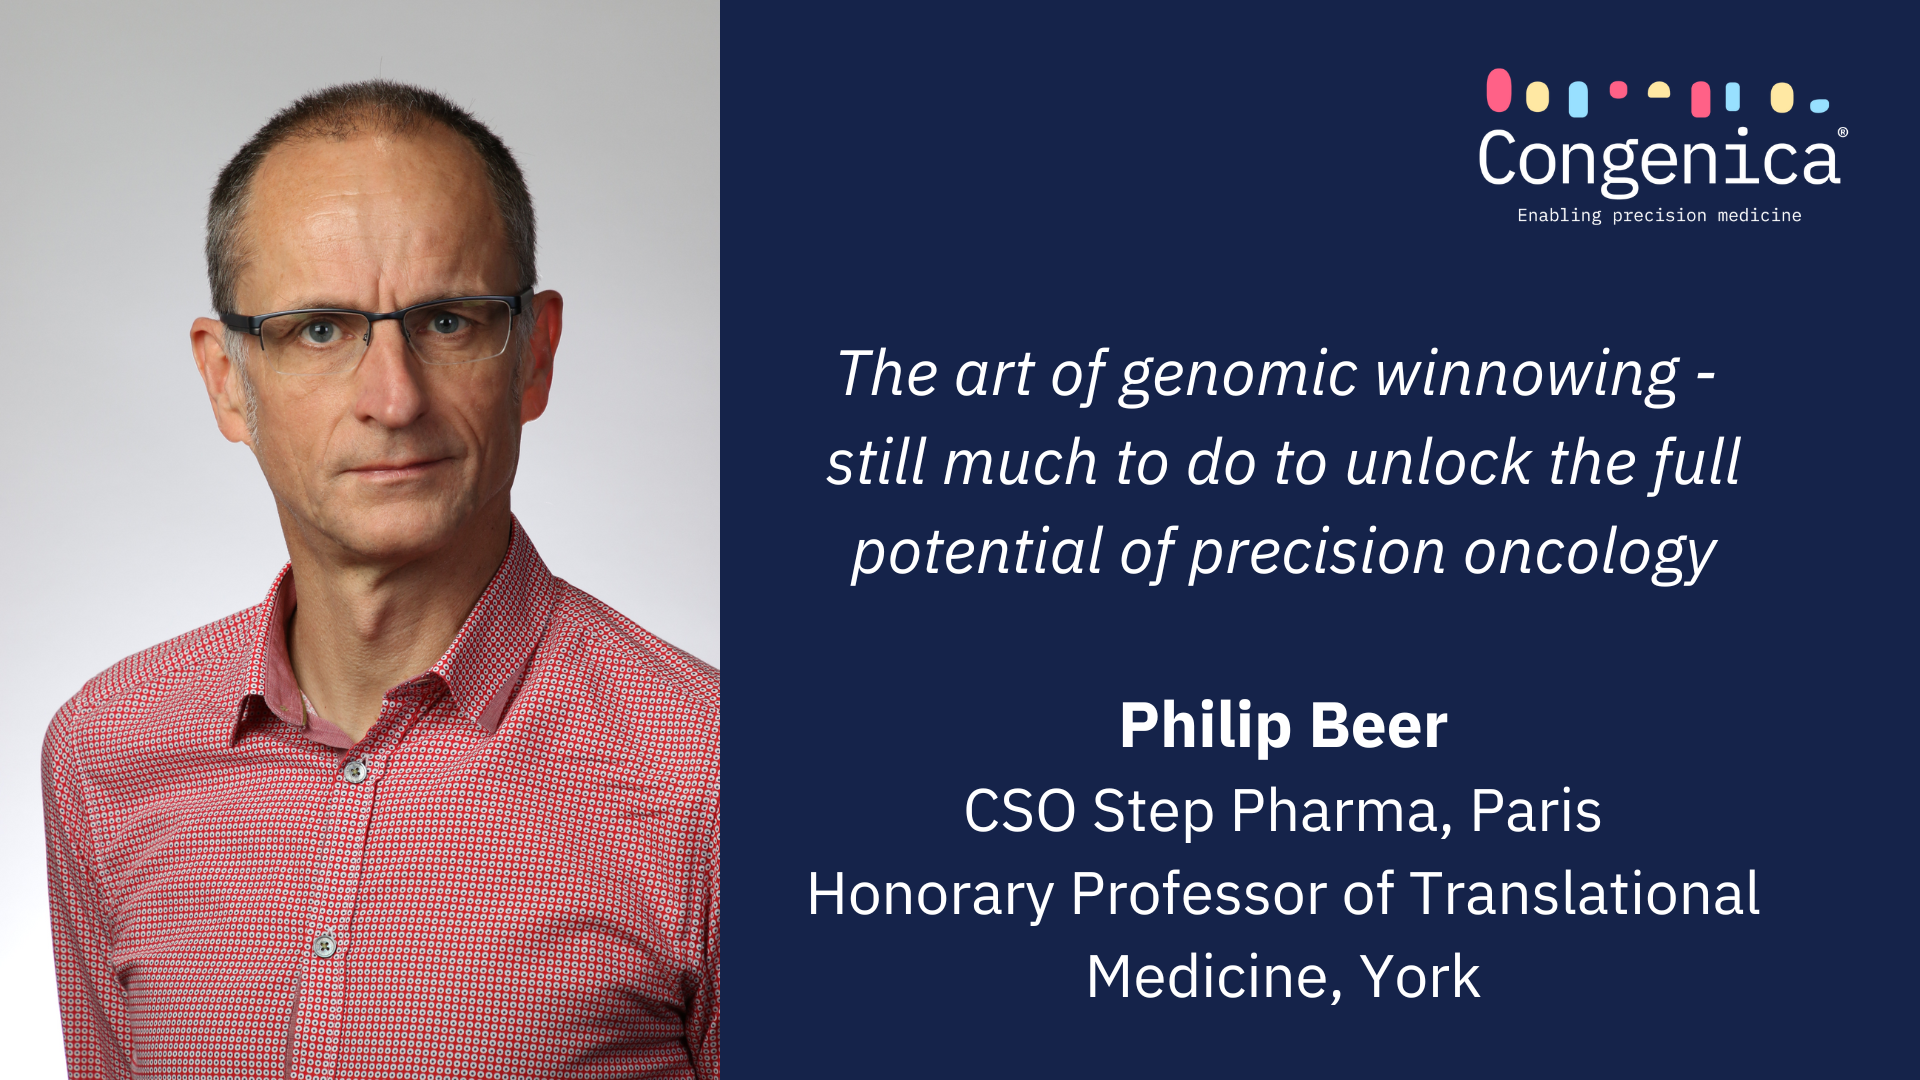 The art of genomic winnowing - there is still much to do to unlock the full potential of precision oncology